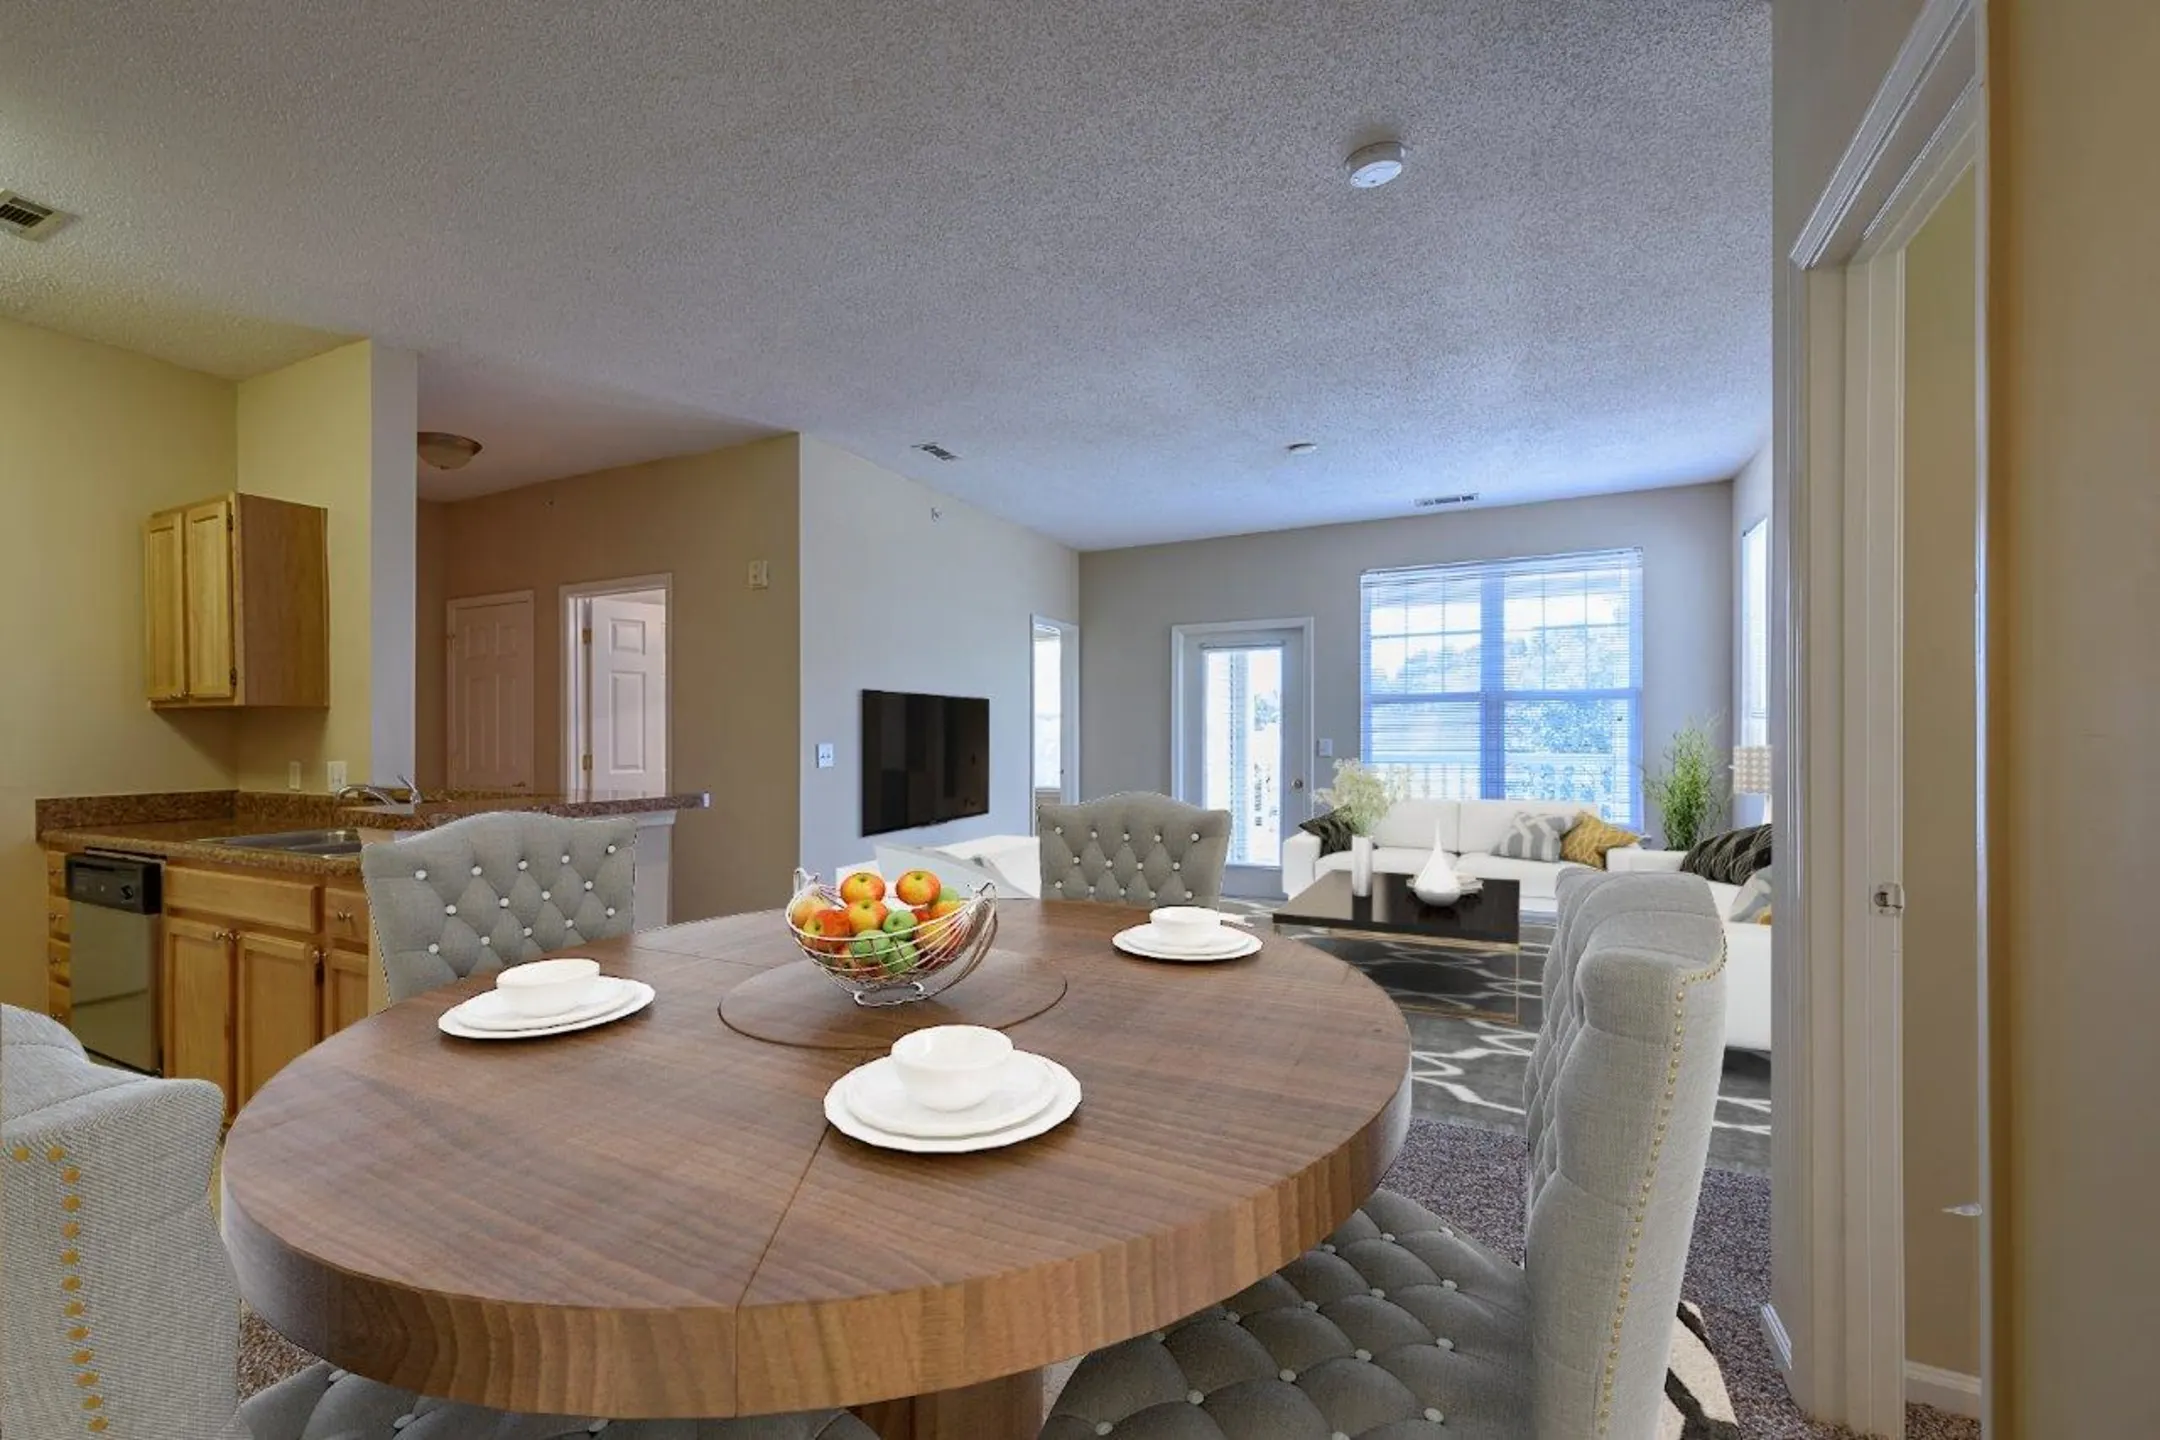 Dining Room - Falls Creek Apartments & Townhomes - Raleigh, NC